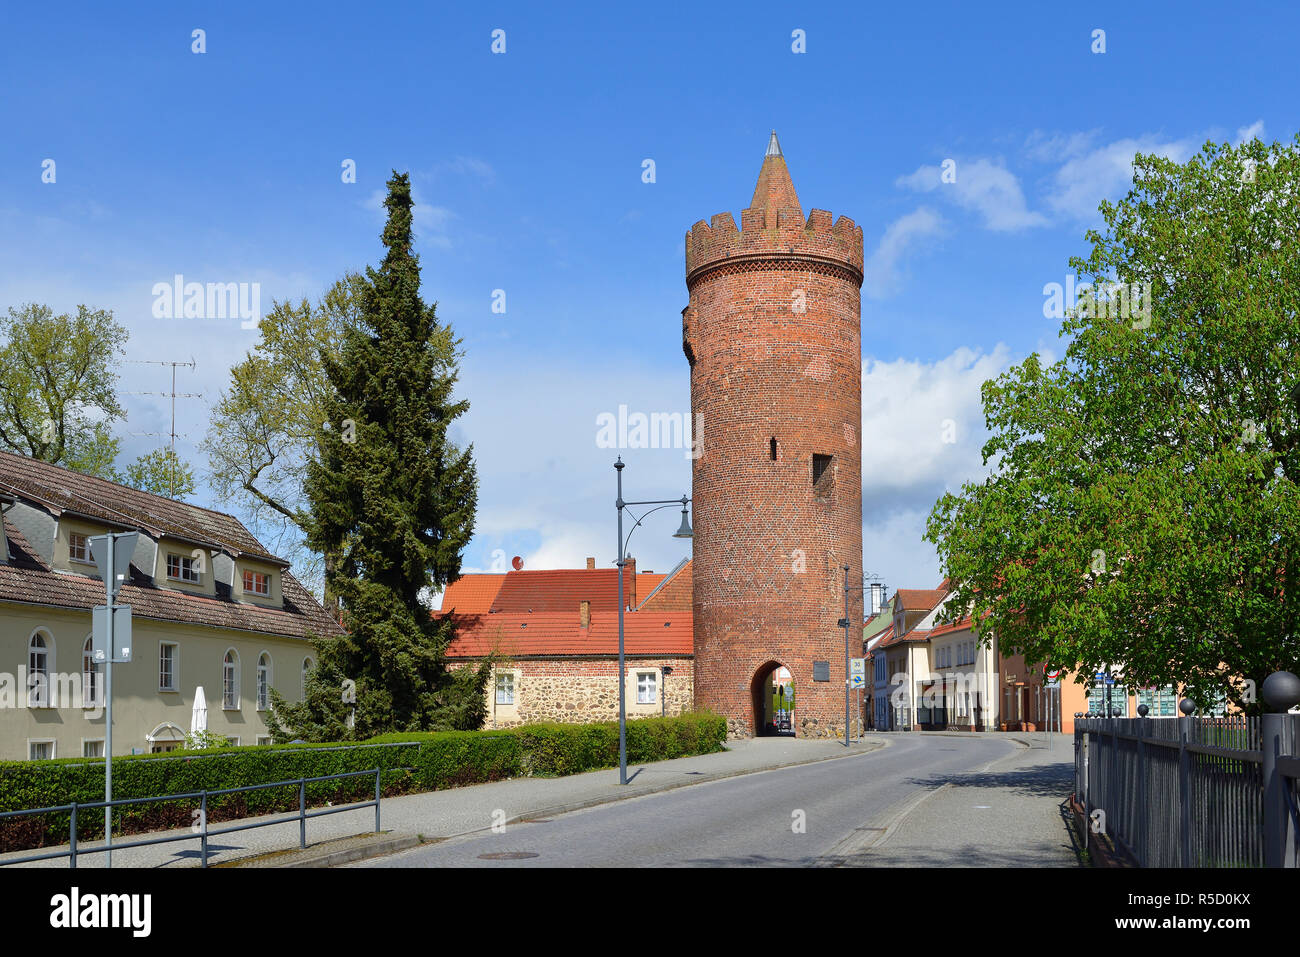 luckauer tor tower (thick tower) in beeskow Stock Photo